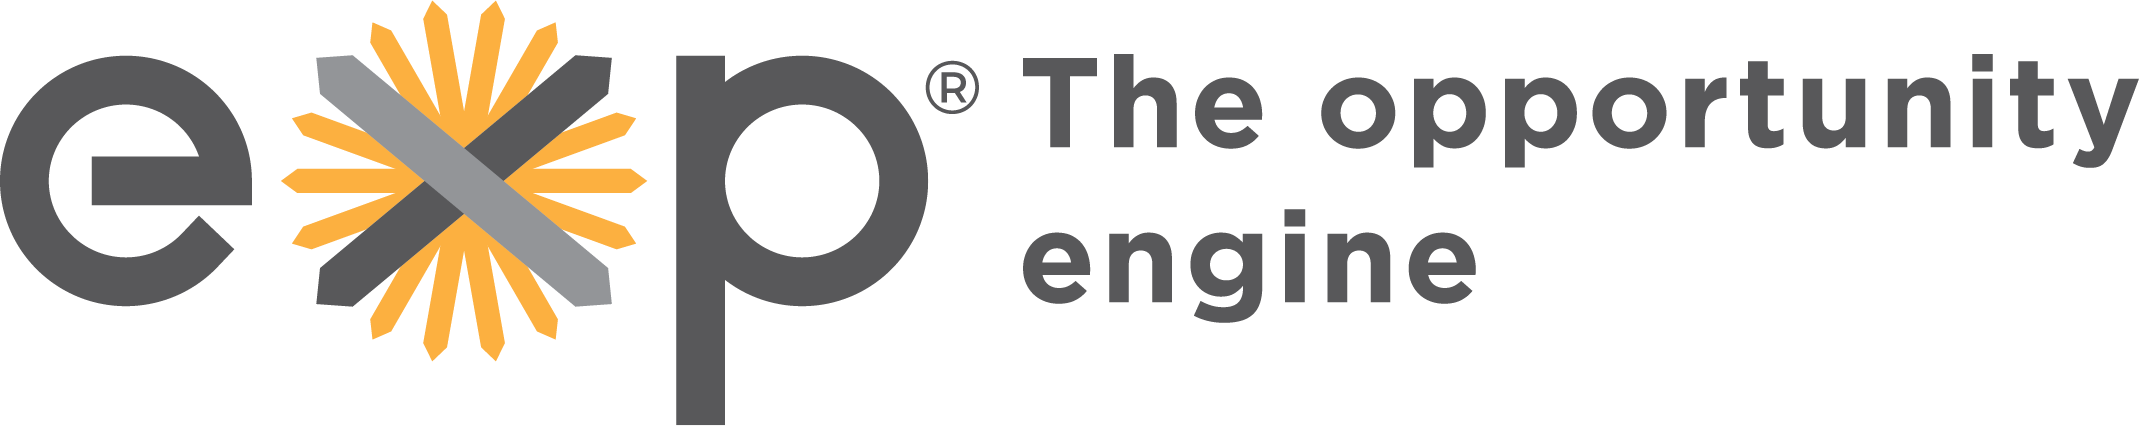 EXP - The opportunity engine